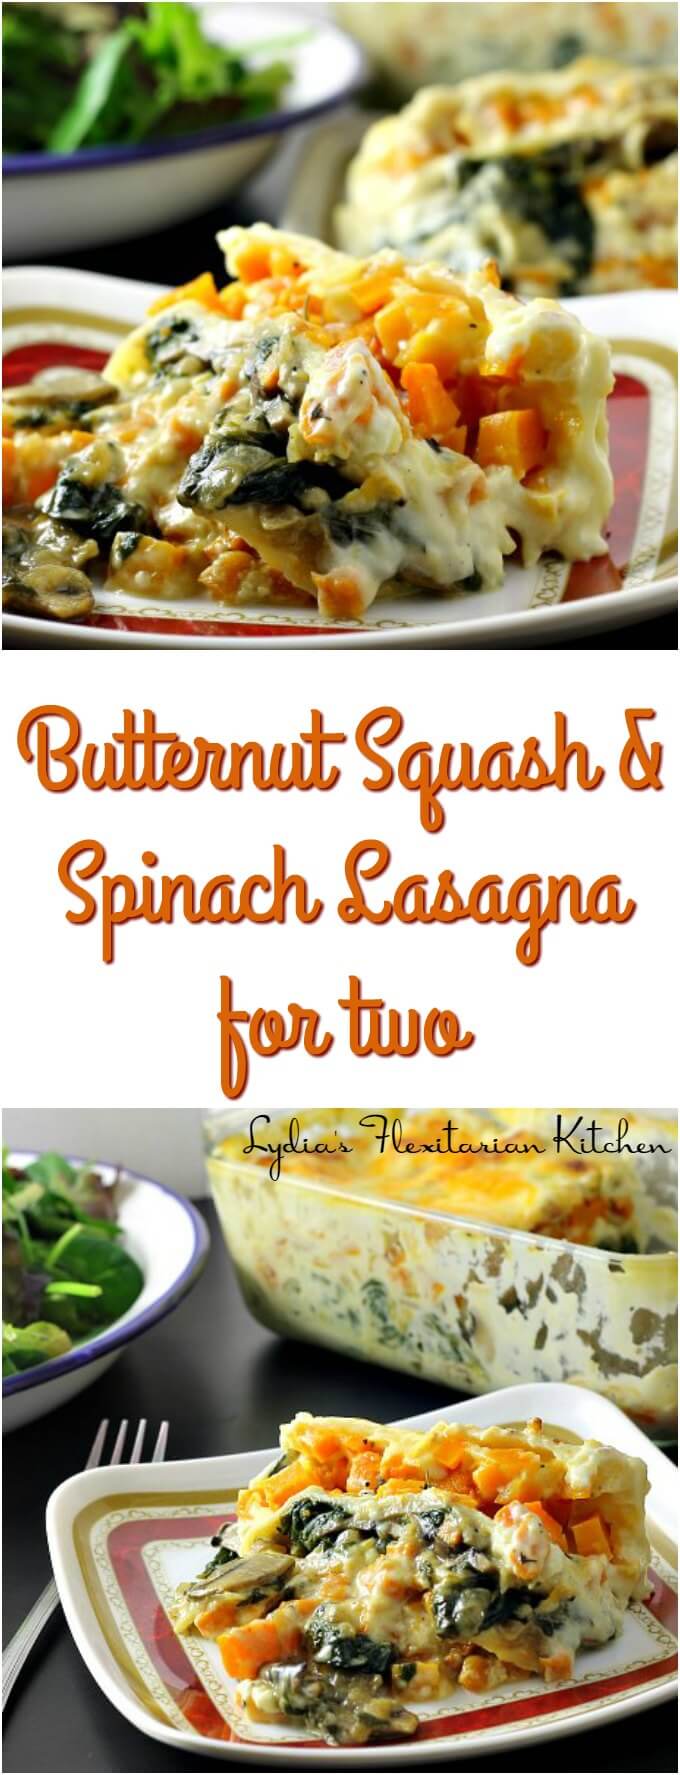 Butternut Squash and Spinach Lasagna for Two ~ Lydia's Flexitarian Kitchen